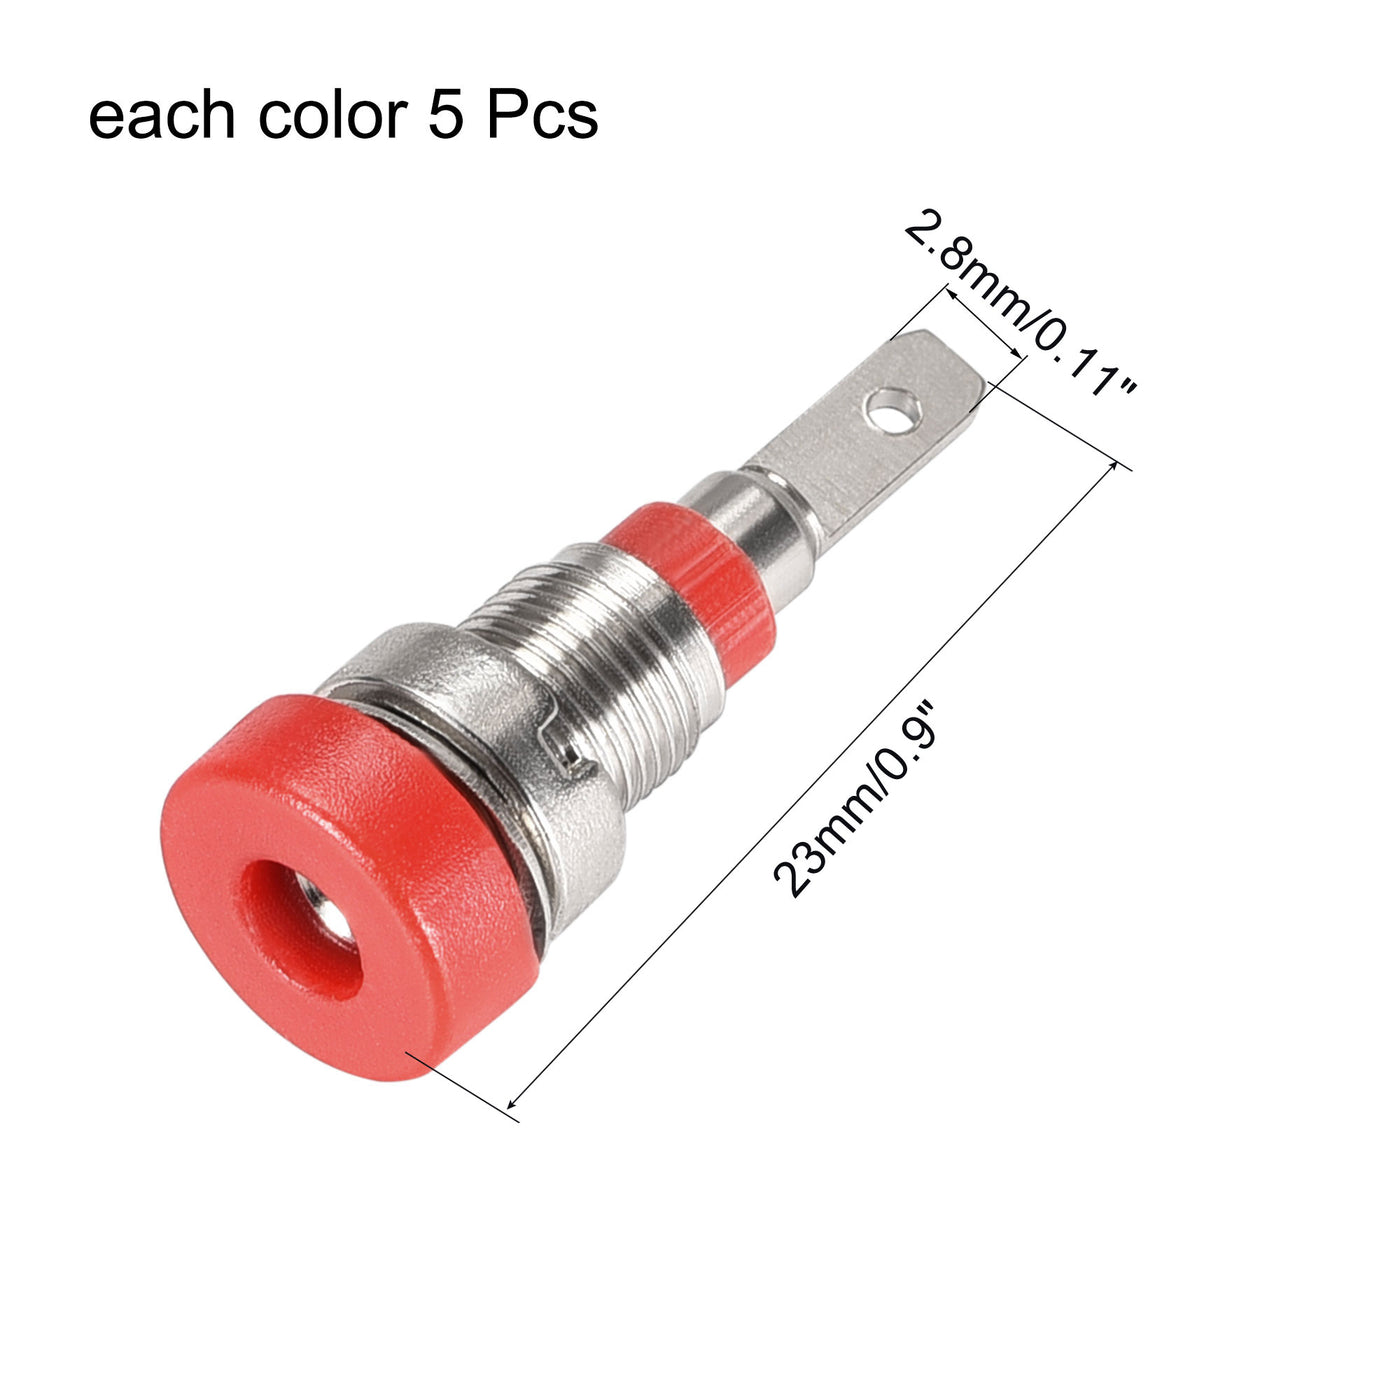 uxcell Uxcell 10pcs 2mm Banana Jack Binding Post Female Socket Plug Terminal Connector 24A for Loudspeaker Amplifier Red Black